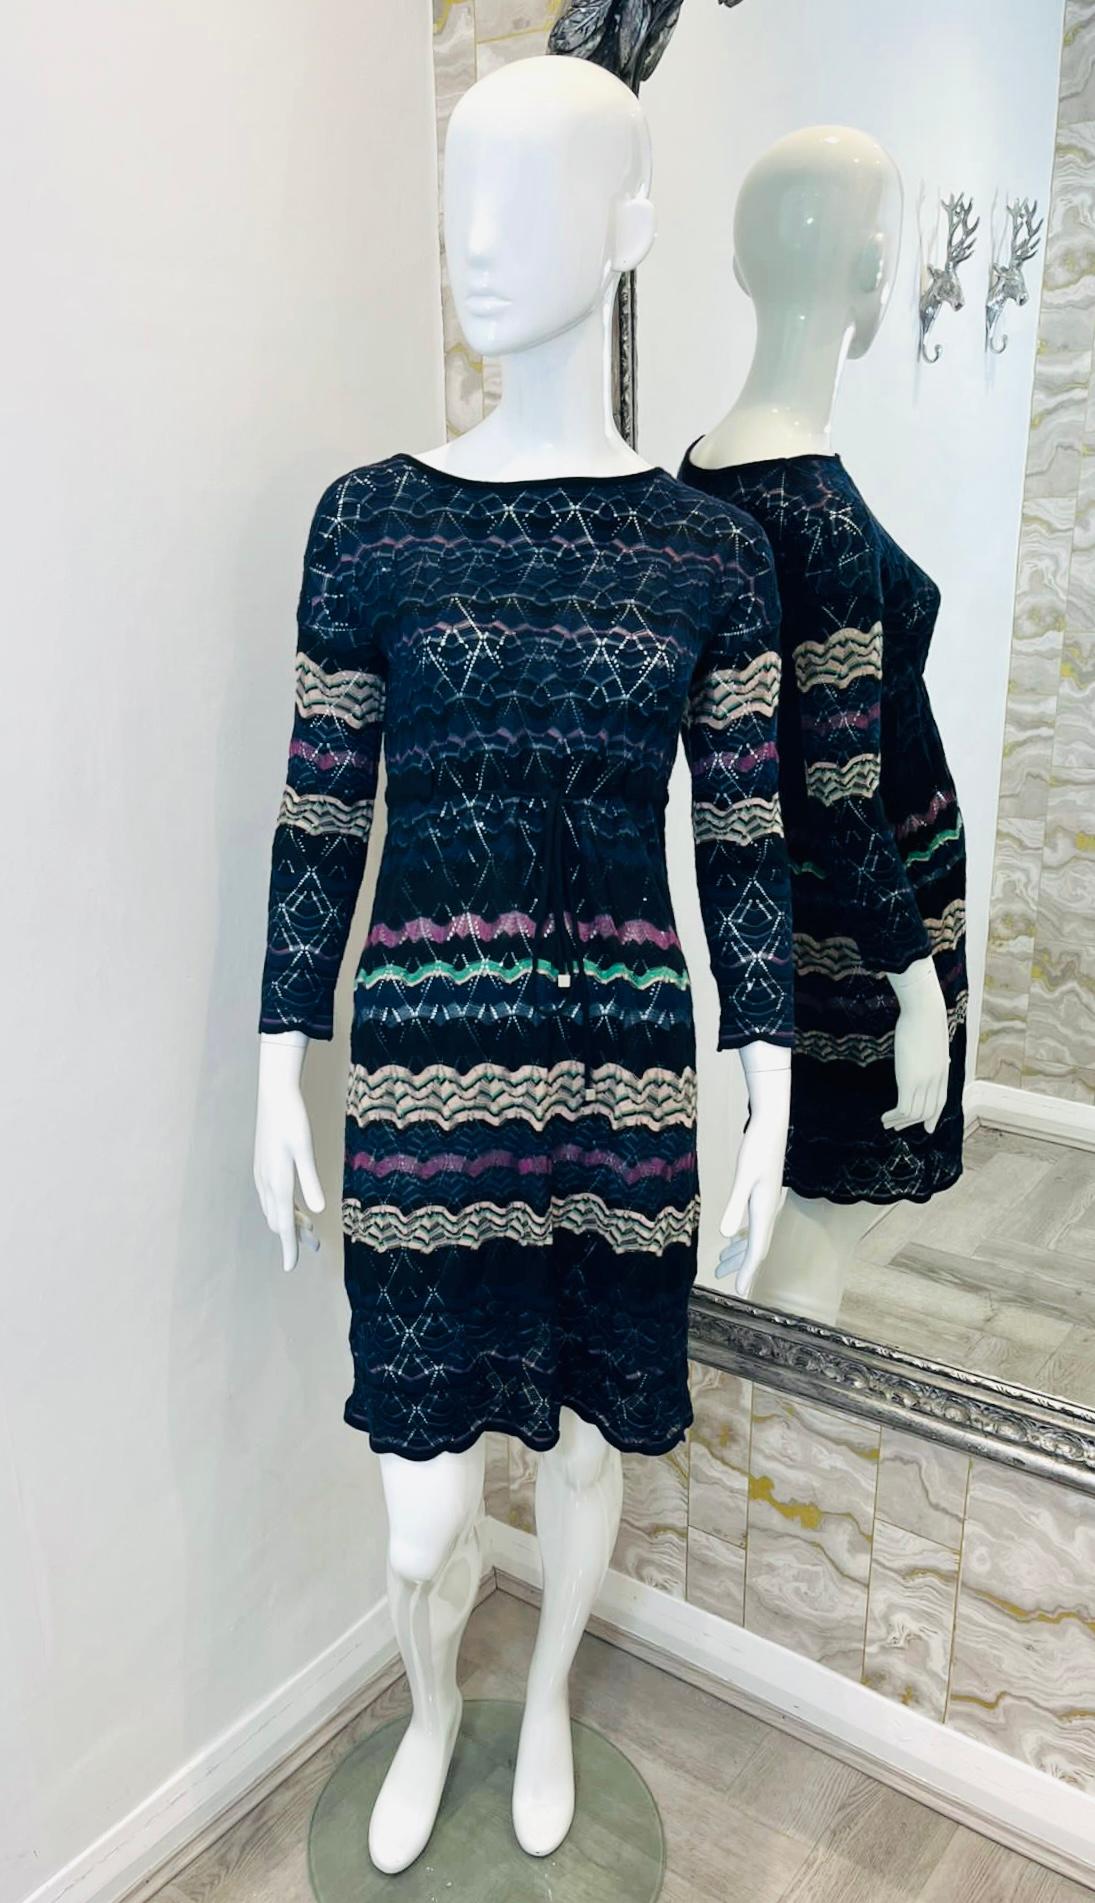 Missoni Crochet Knit Striped Dress

Navy dress designed with the brand's signature multicoloured zig zag stripe pattern.

Featuring boat neckline, three-quarter sleeves and mid-thigh length.

Styled with self-tie string belt to waist.

Size –